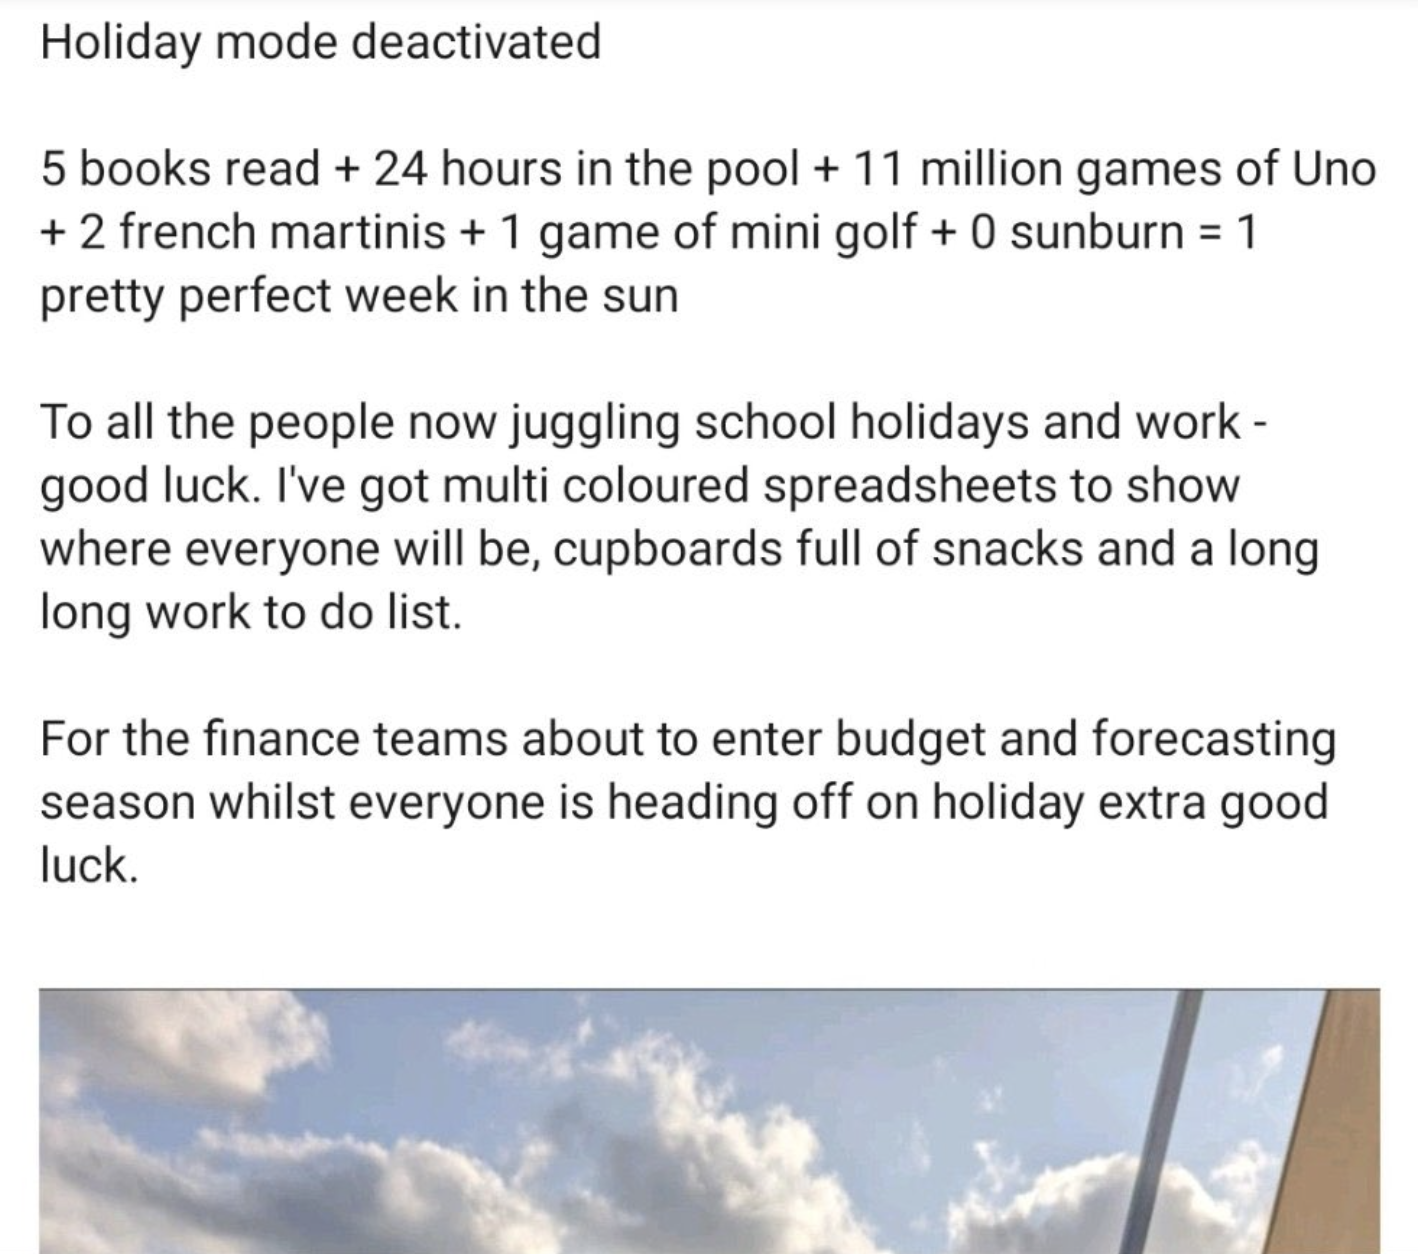 angle - Holiday mode deactivated 5 books read 24 hours in the pool 11 million games of Uno 2 french martinis 1 game of mini golf 0 sunburn 1 pretty perfect week in the sun To all the people now juggling school holidays and work good luck. I've got multi c